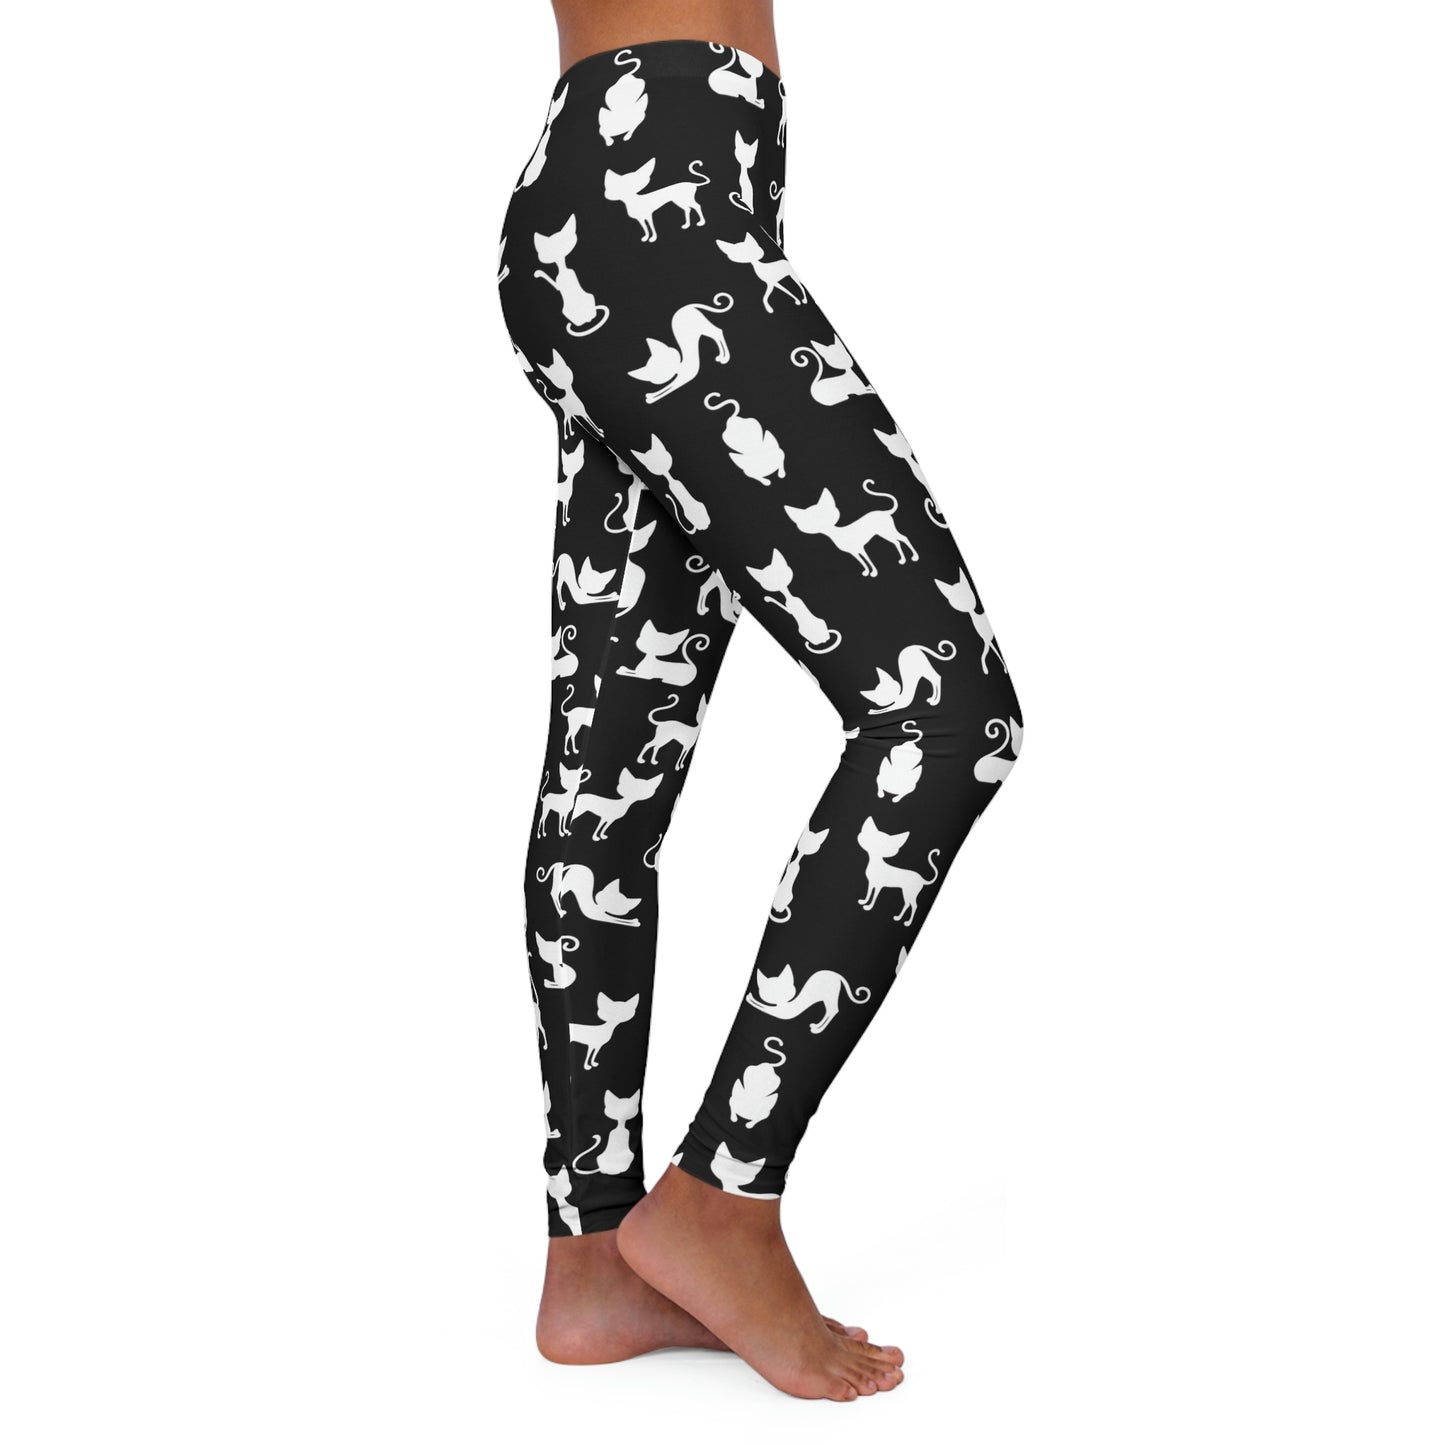 Cat Mom animal kingdom, Women Leggings, One of a Kind Workout Activewear for Wife Fitness, Best Friend, mom and me tights Christmas Gift